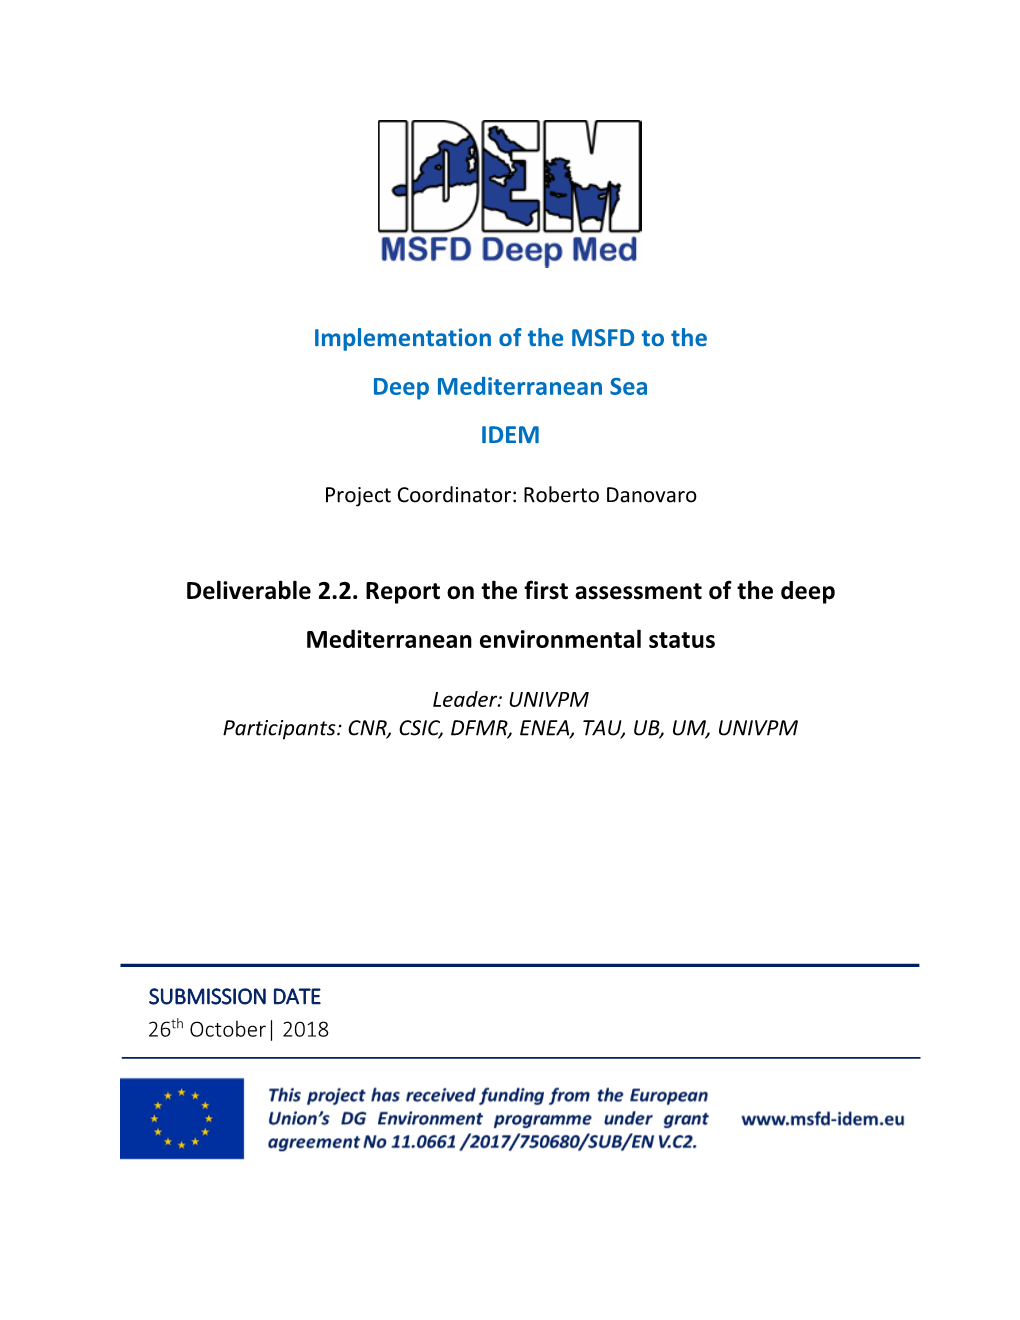 Implementation of the MSFD to the Deep Mediterranean Sea IDEM